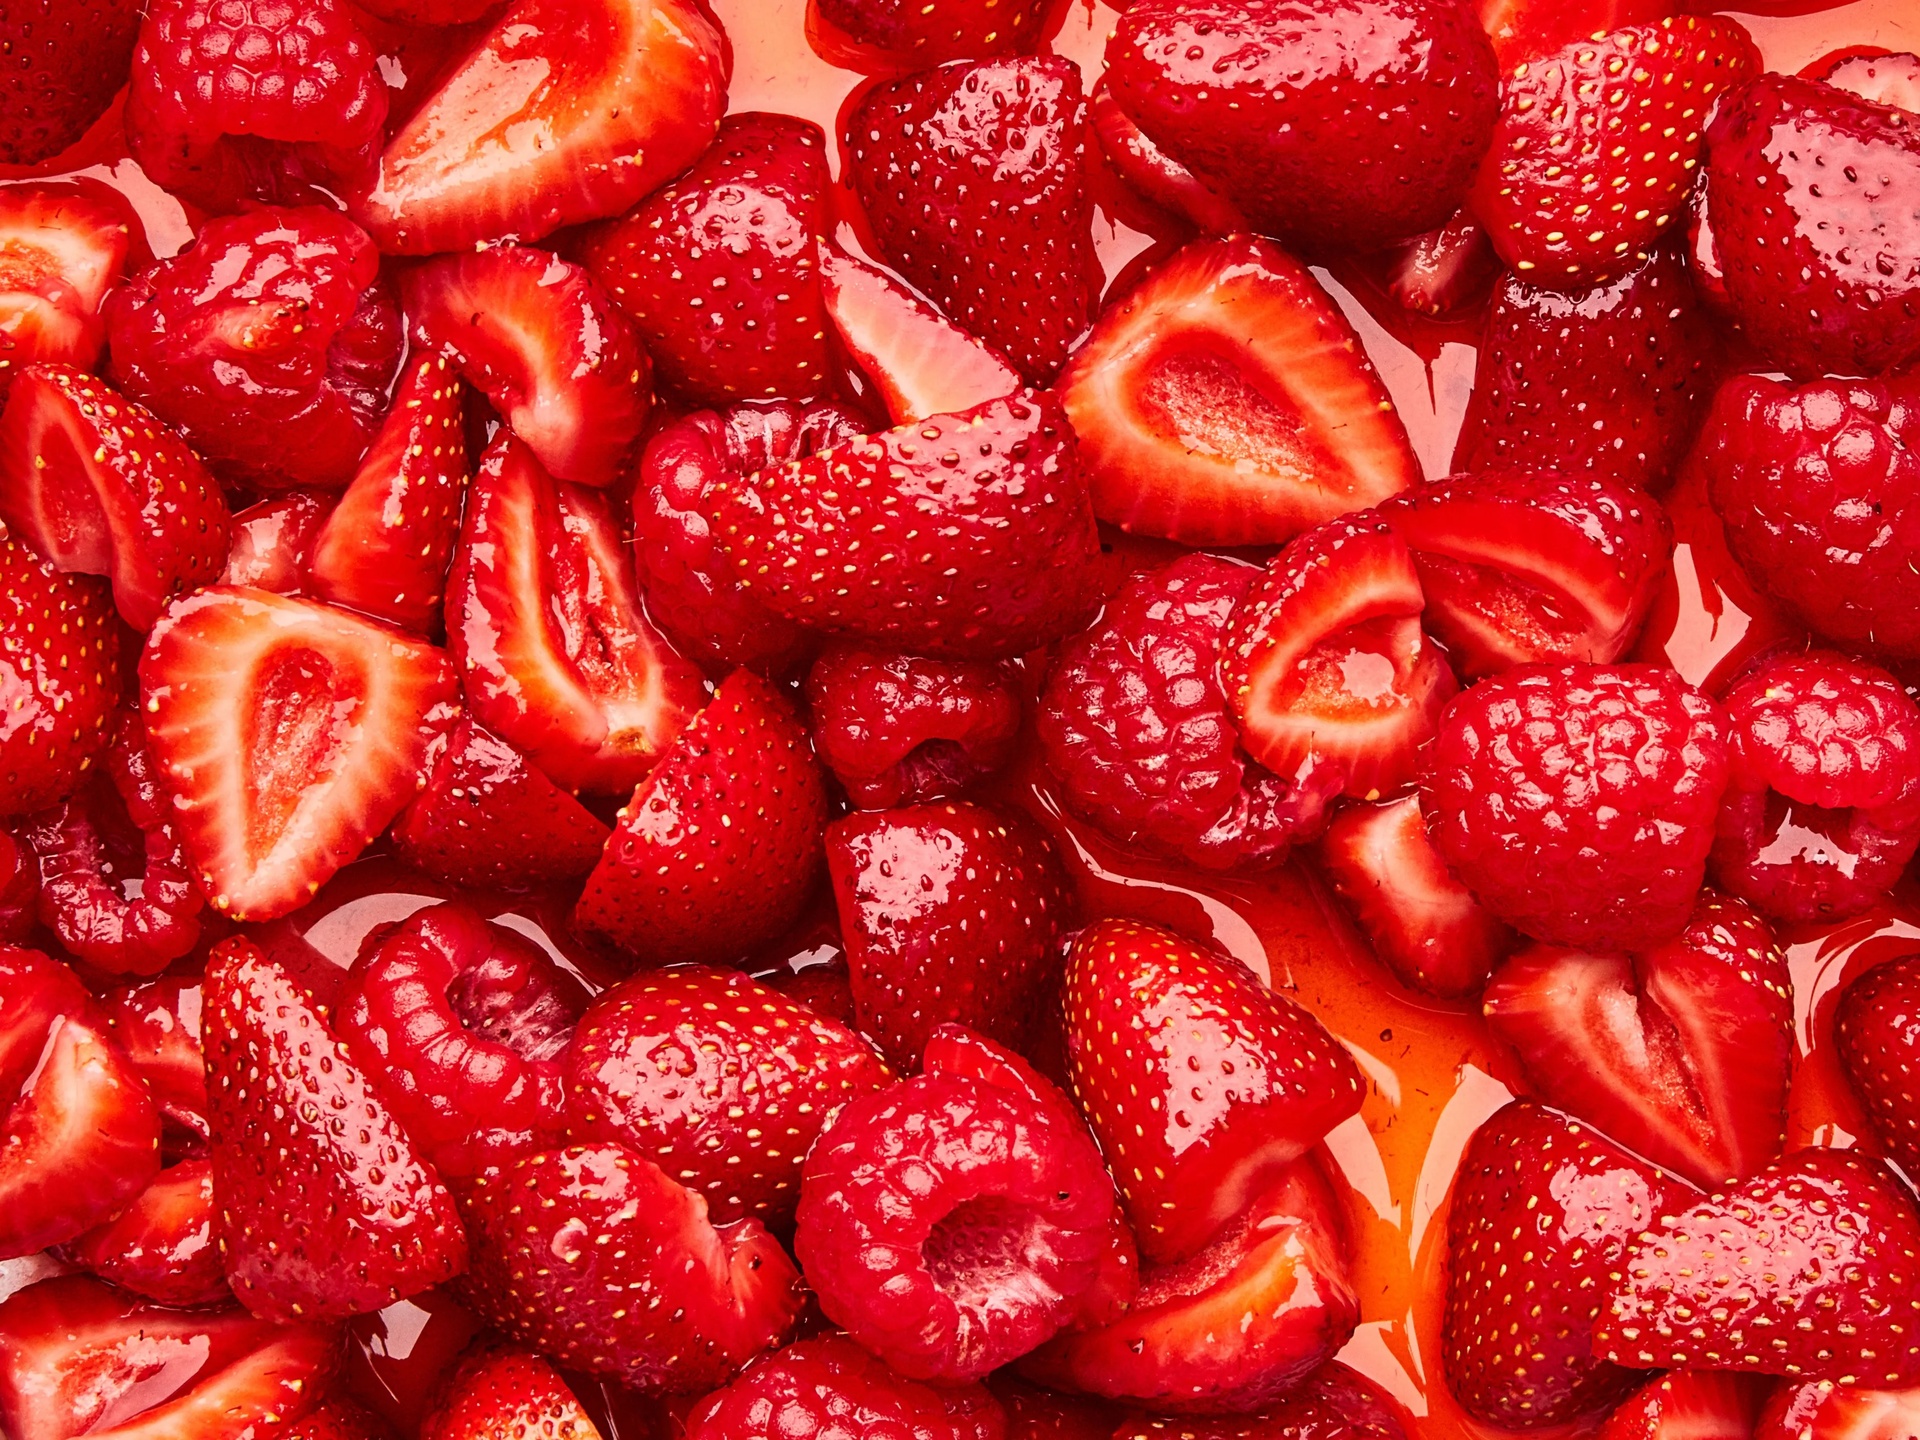 Strawberry Good Fruits You Should Eat Every Day